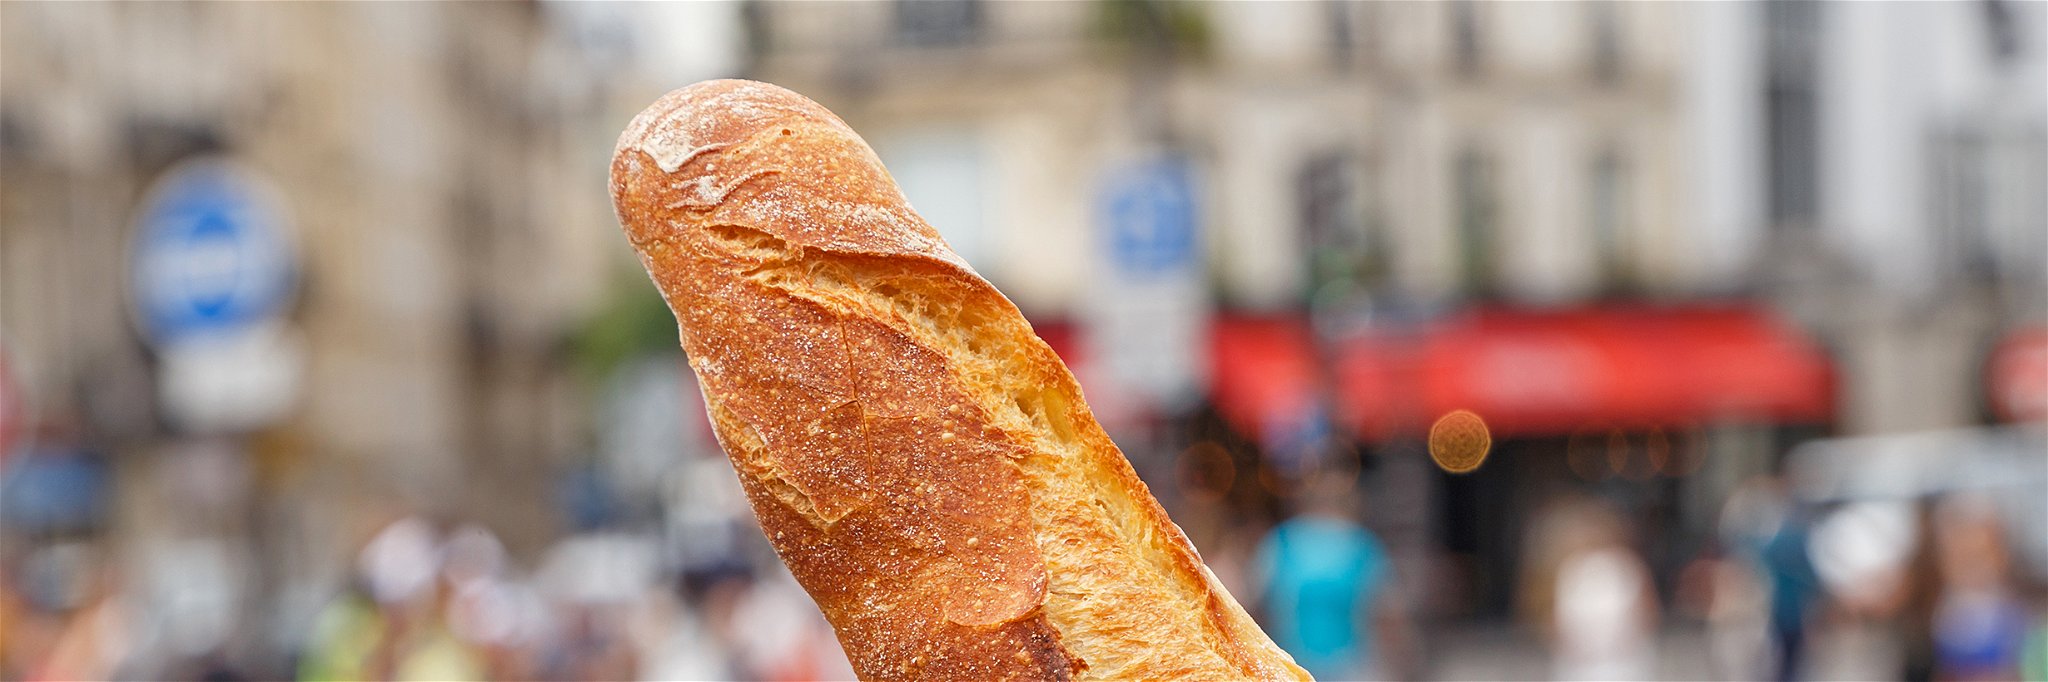 A typical baguette is made only from flour, water, salt and yeast.